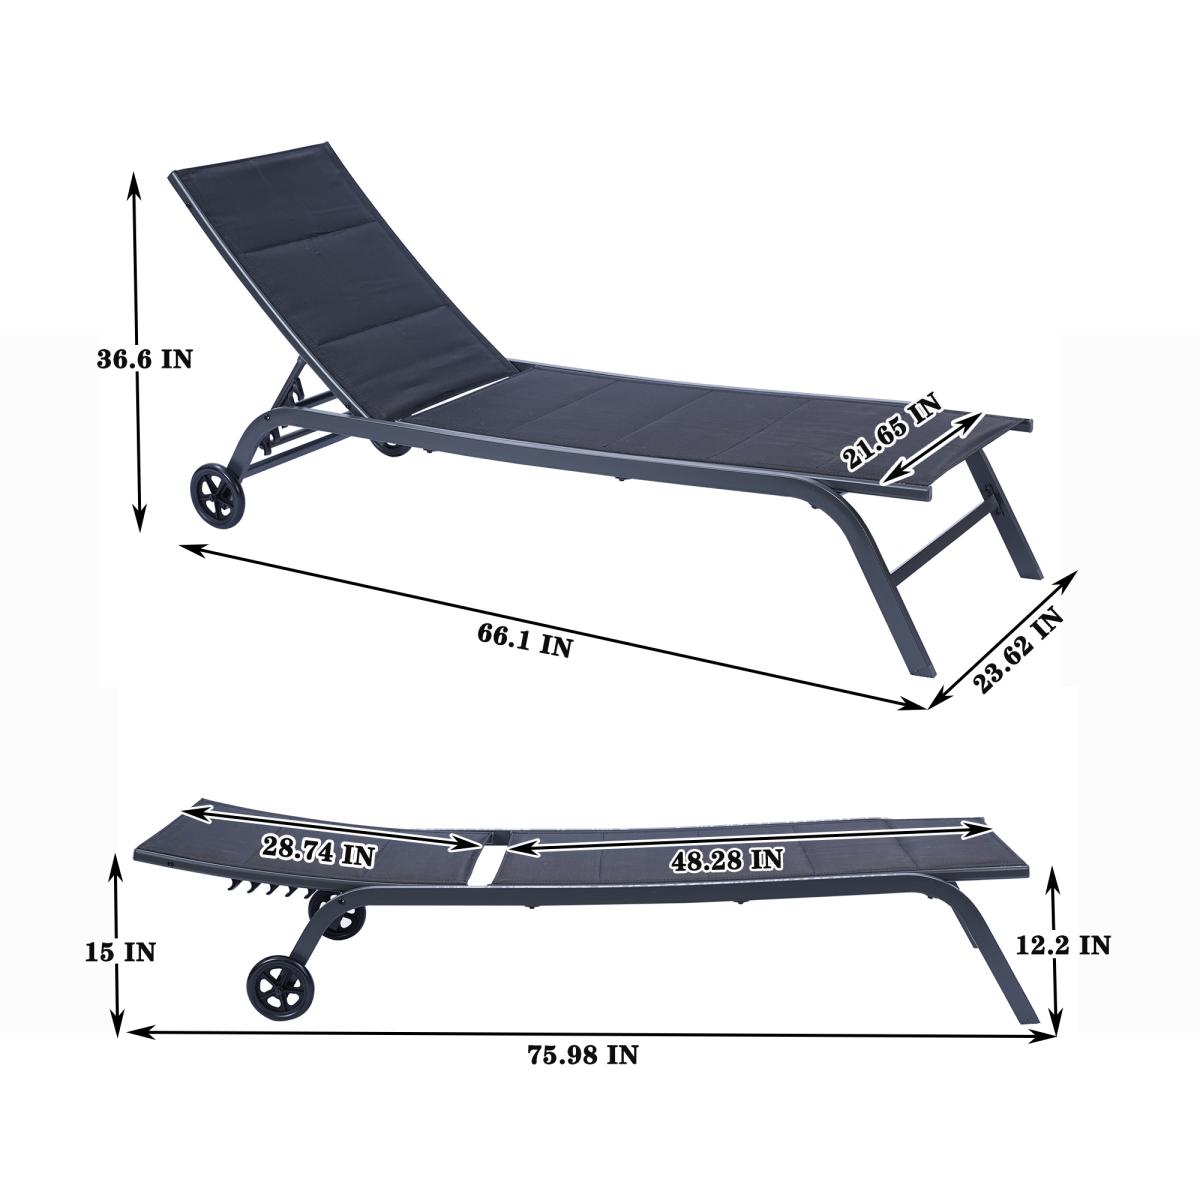 2-Piece Set Outdoor Patio Chaise Lounge Chair, Five-Position Adjustable Metal Recliner, All Weather For Patio,Beach,Yard, Pool